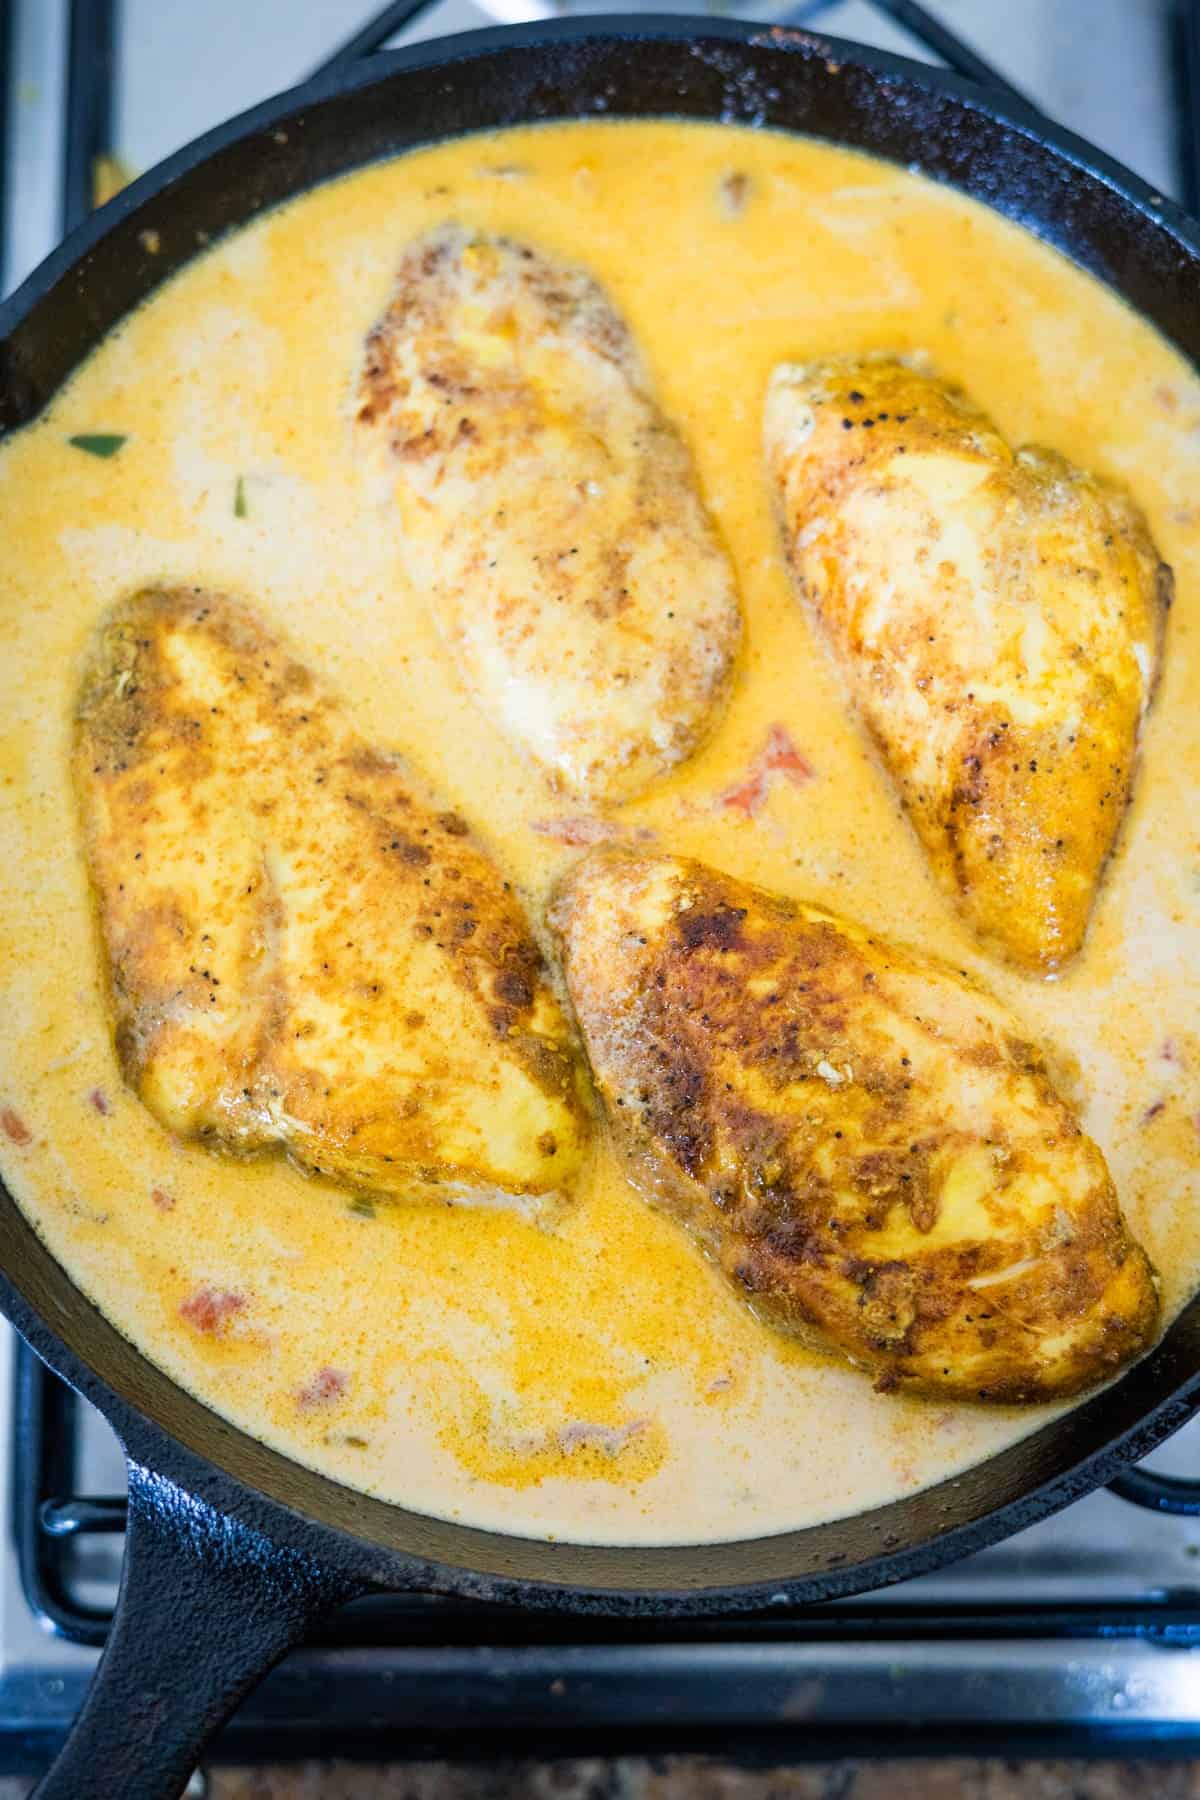 Brazilian coconut chicken cooked in a creamy sauce.